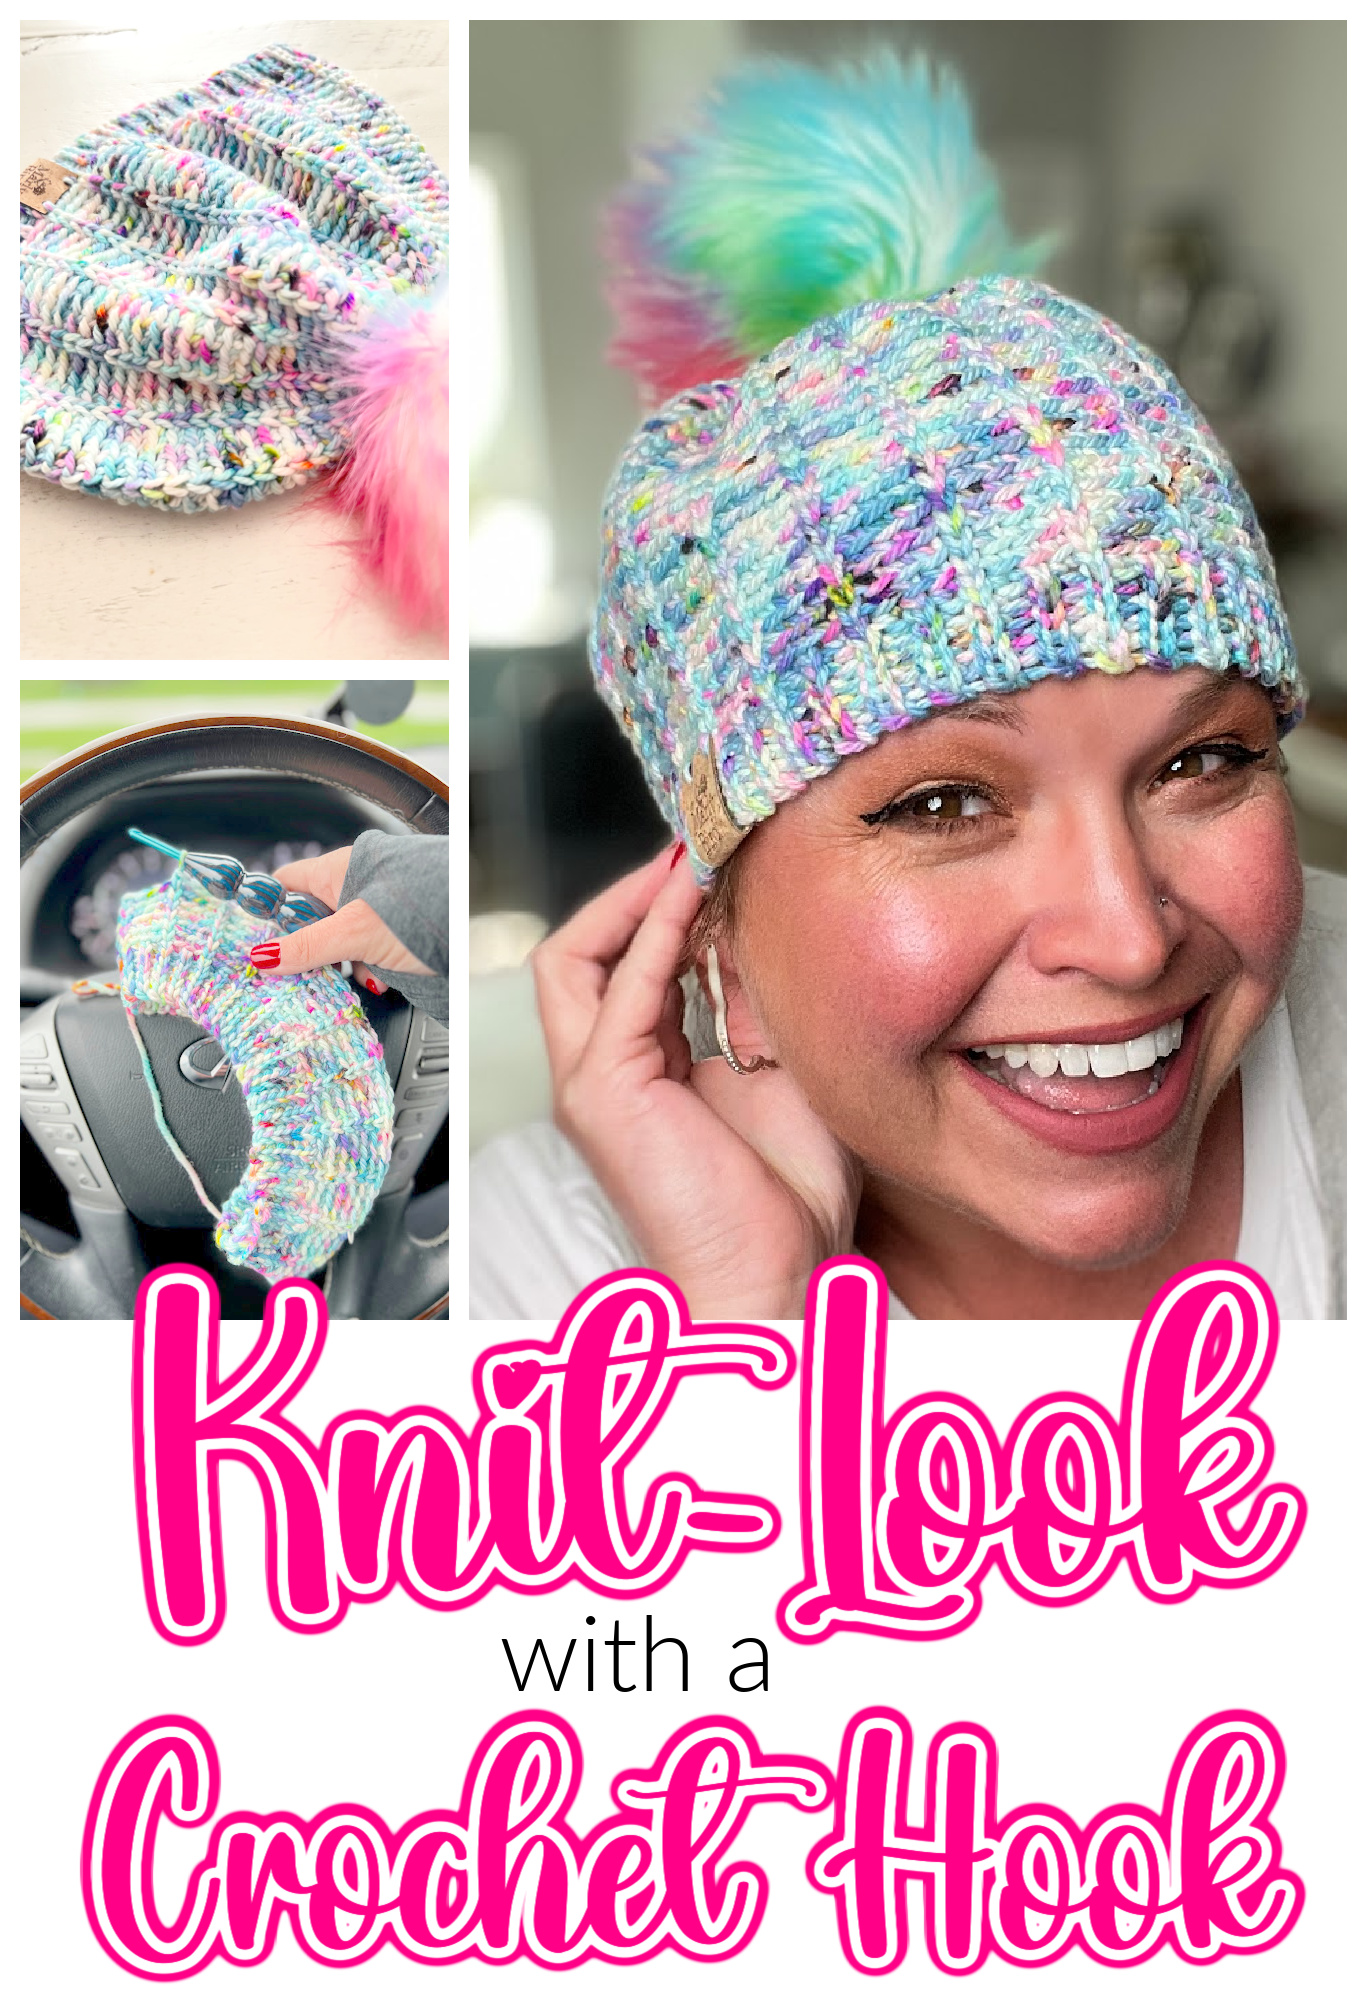 A smiling woman dons a colorful, knit-look crochet beanie topped with a fur pom-pom, beside images showcasing the beanie and a hand skillfully using a crochet hook. Text below reads, "Knit-Look with a Crochet Hook. -Marly Bird